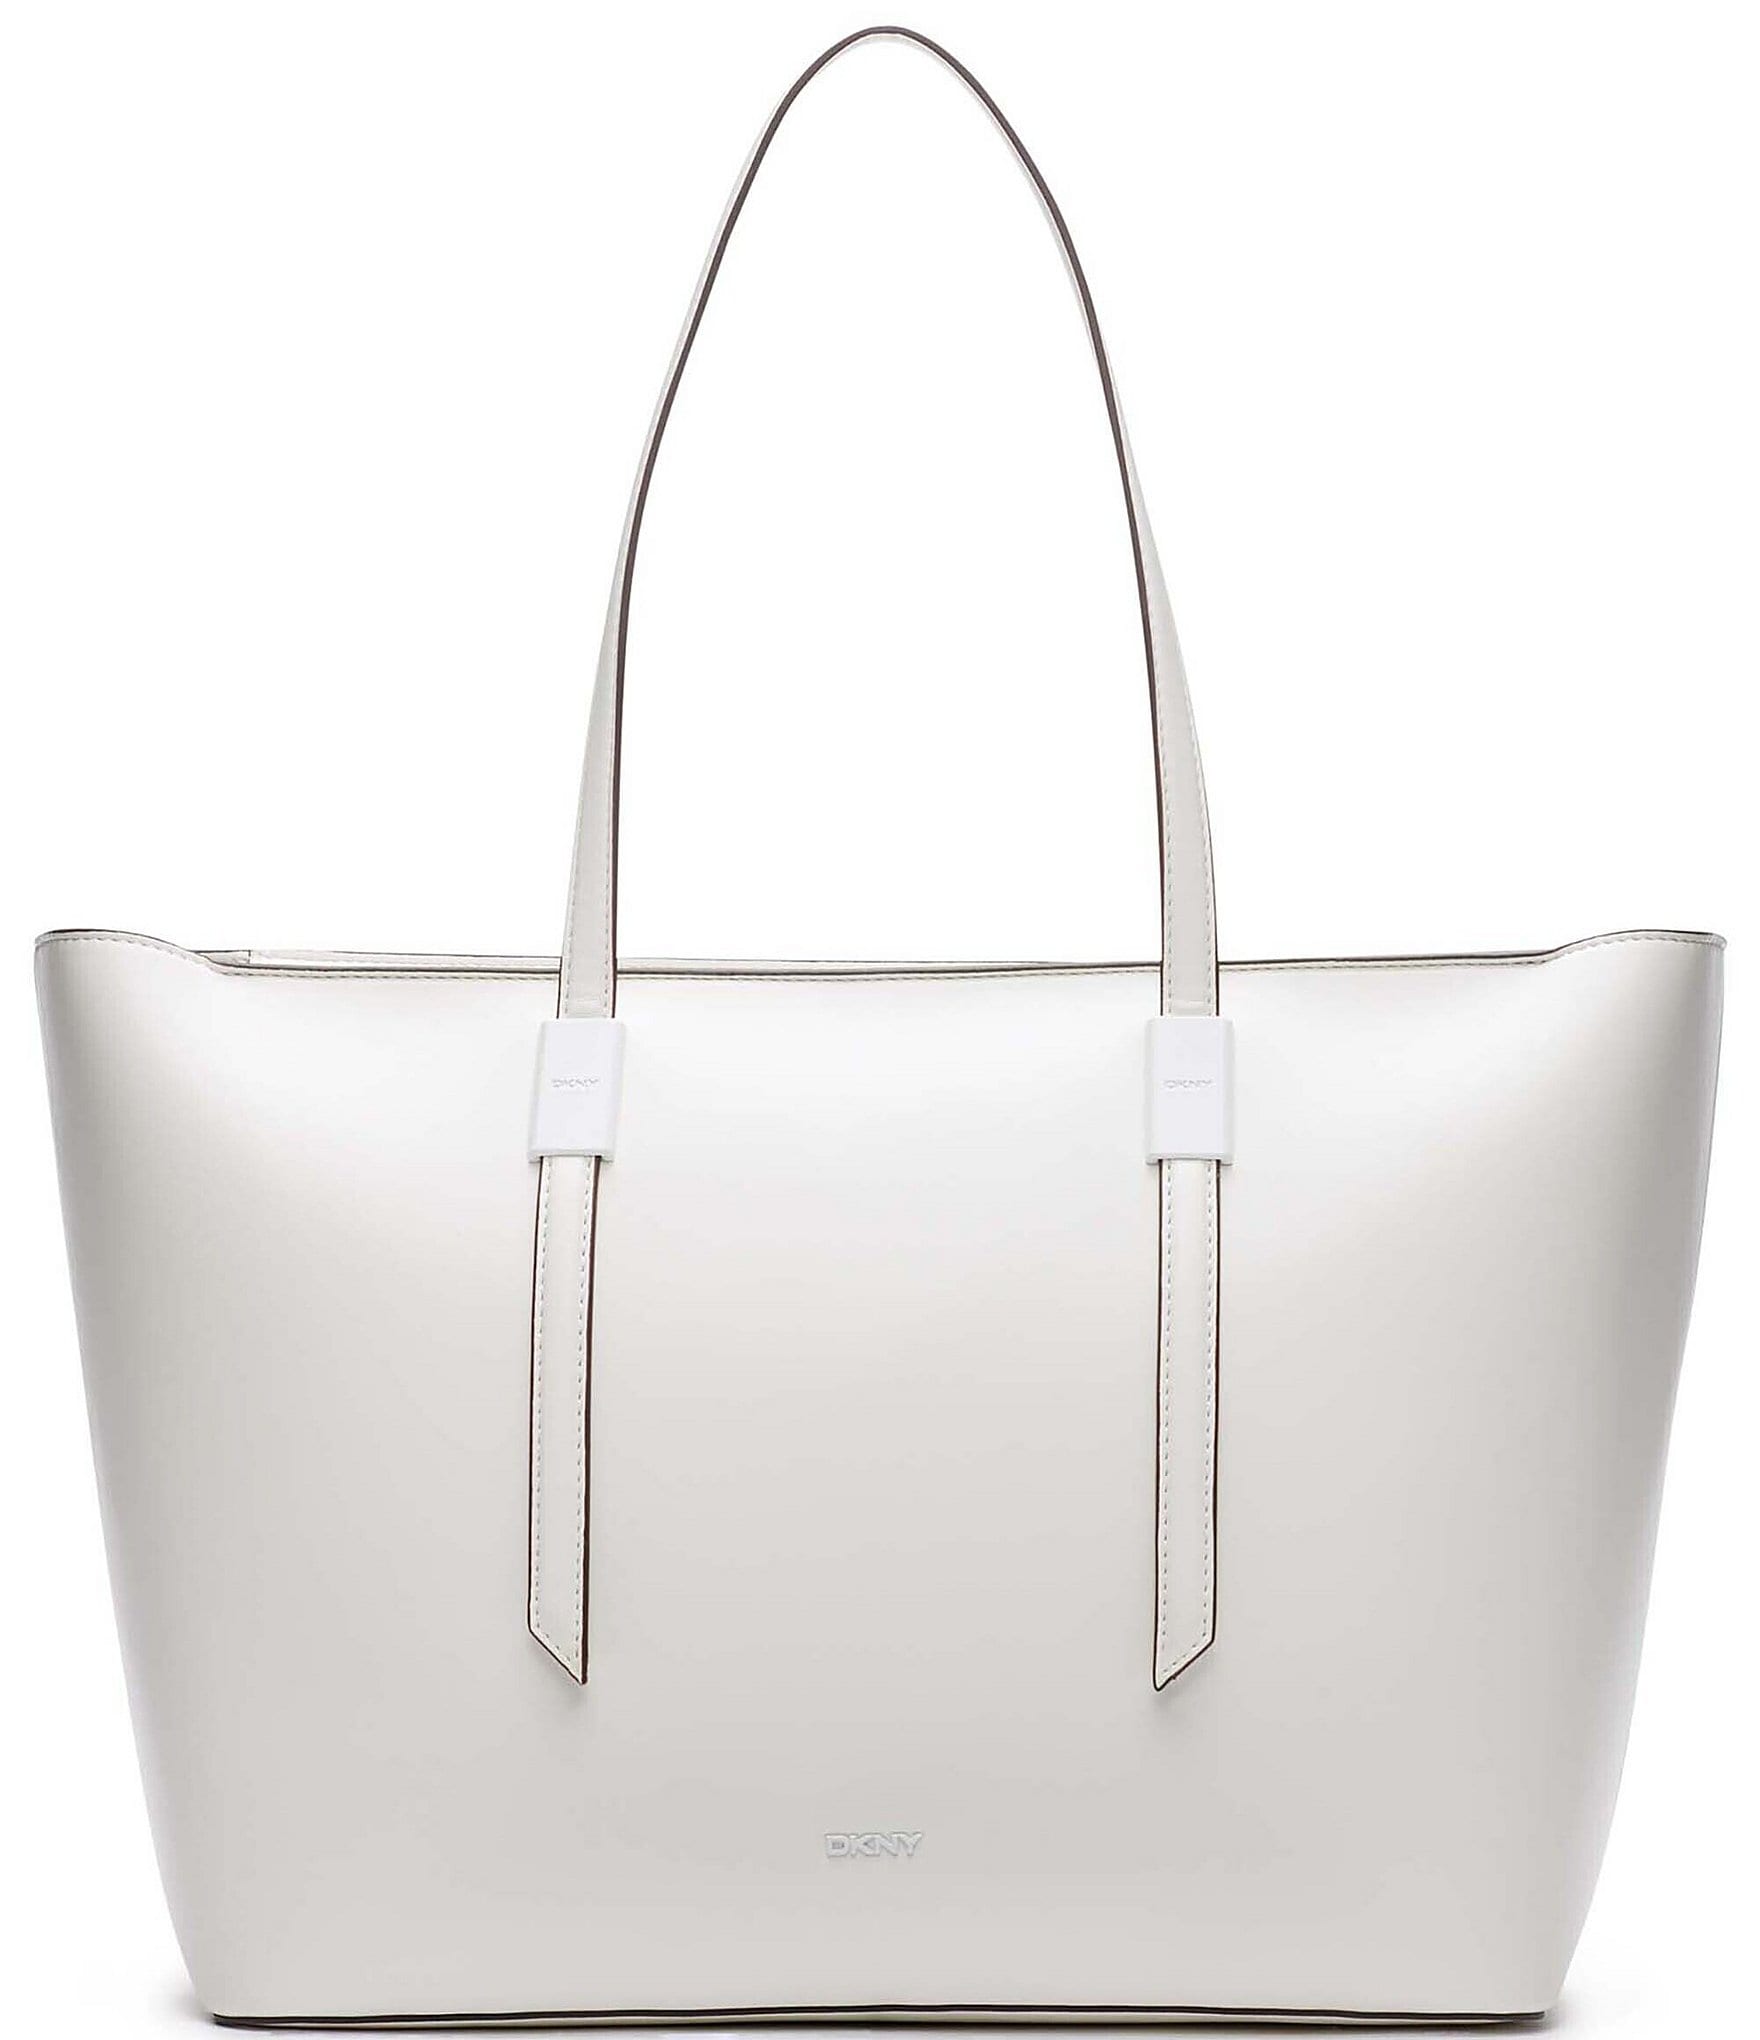  DKNY Women's Whitney Floral Center Zip Tote Handbag White :  Clothing, Shoes & Jewelry